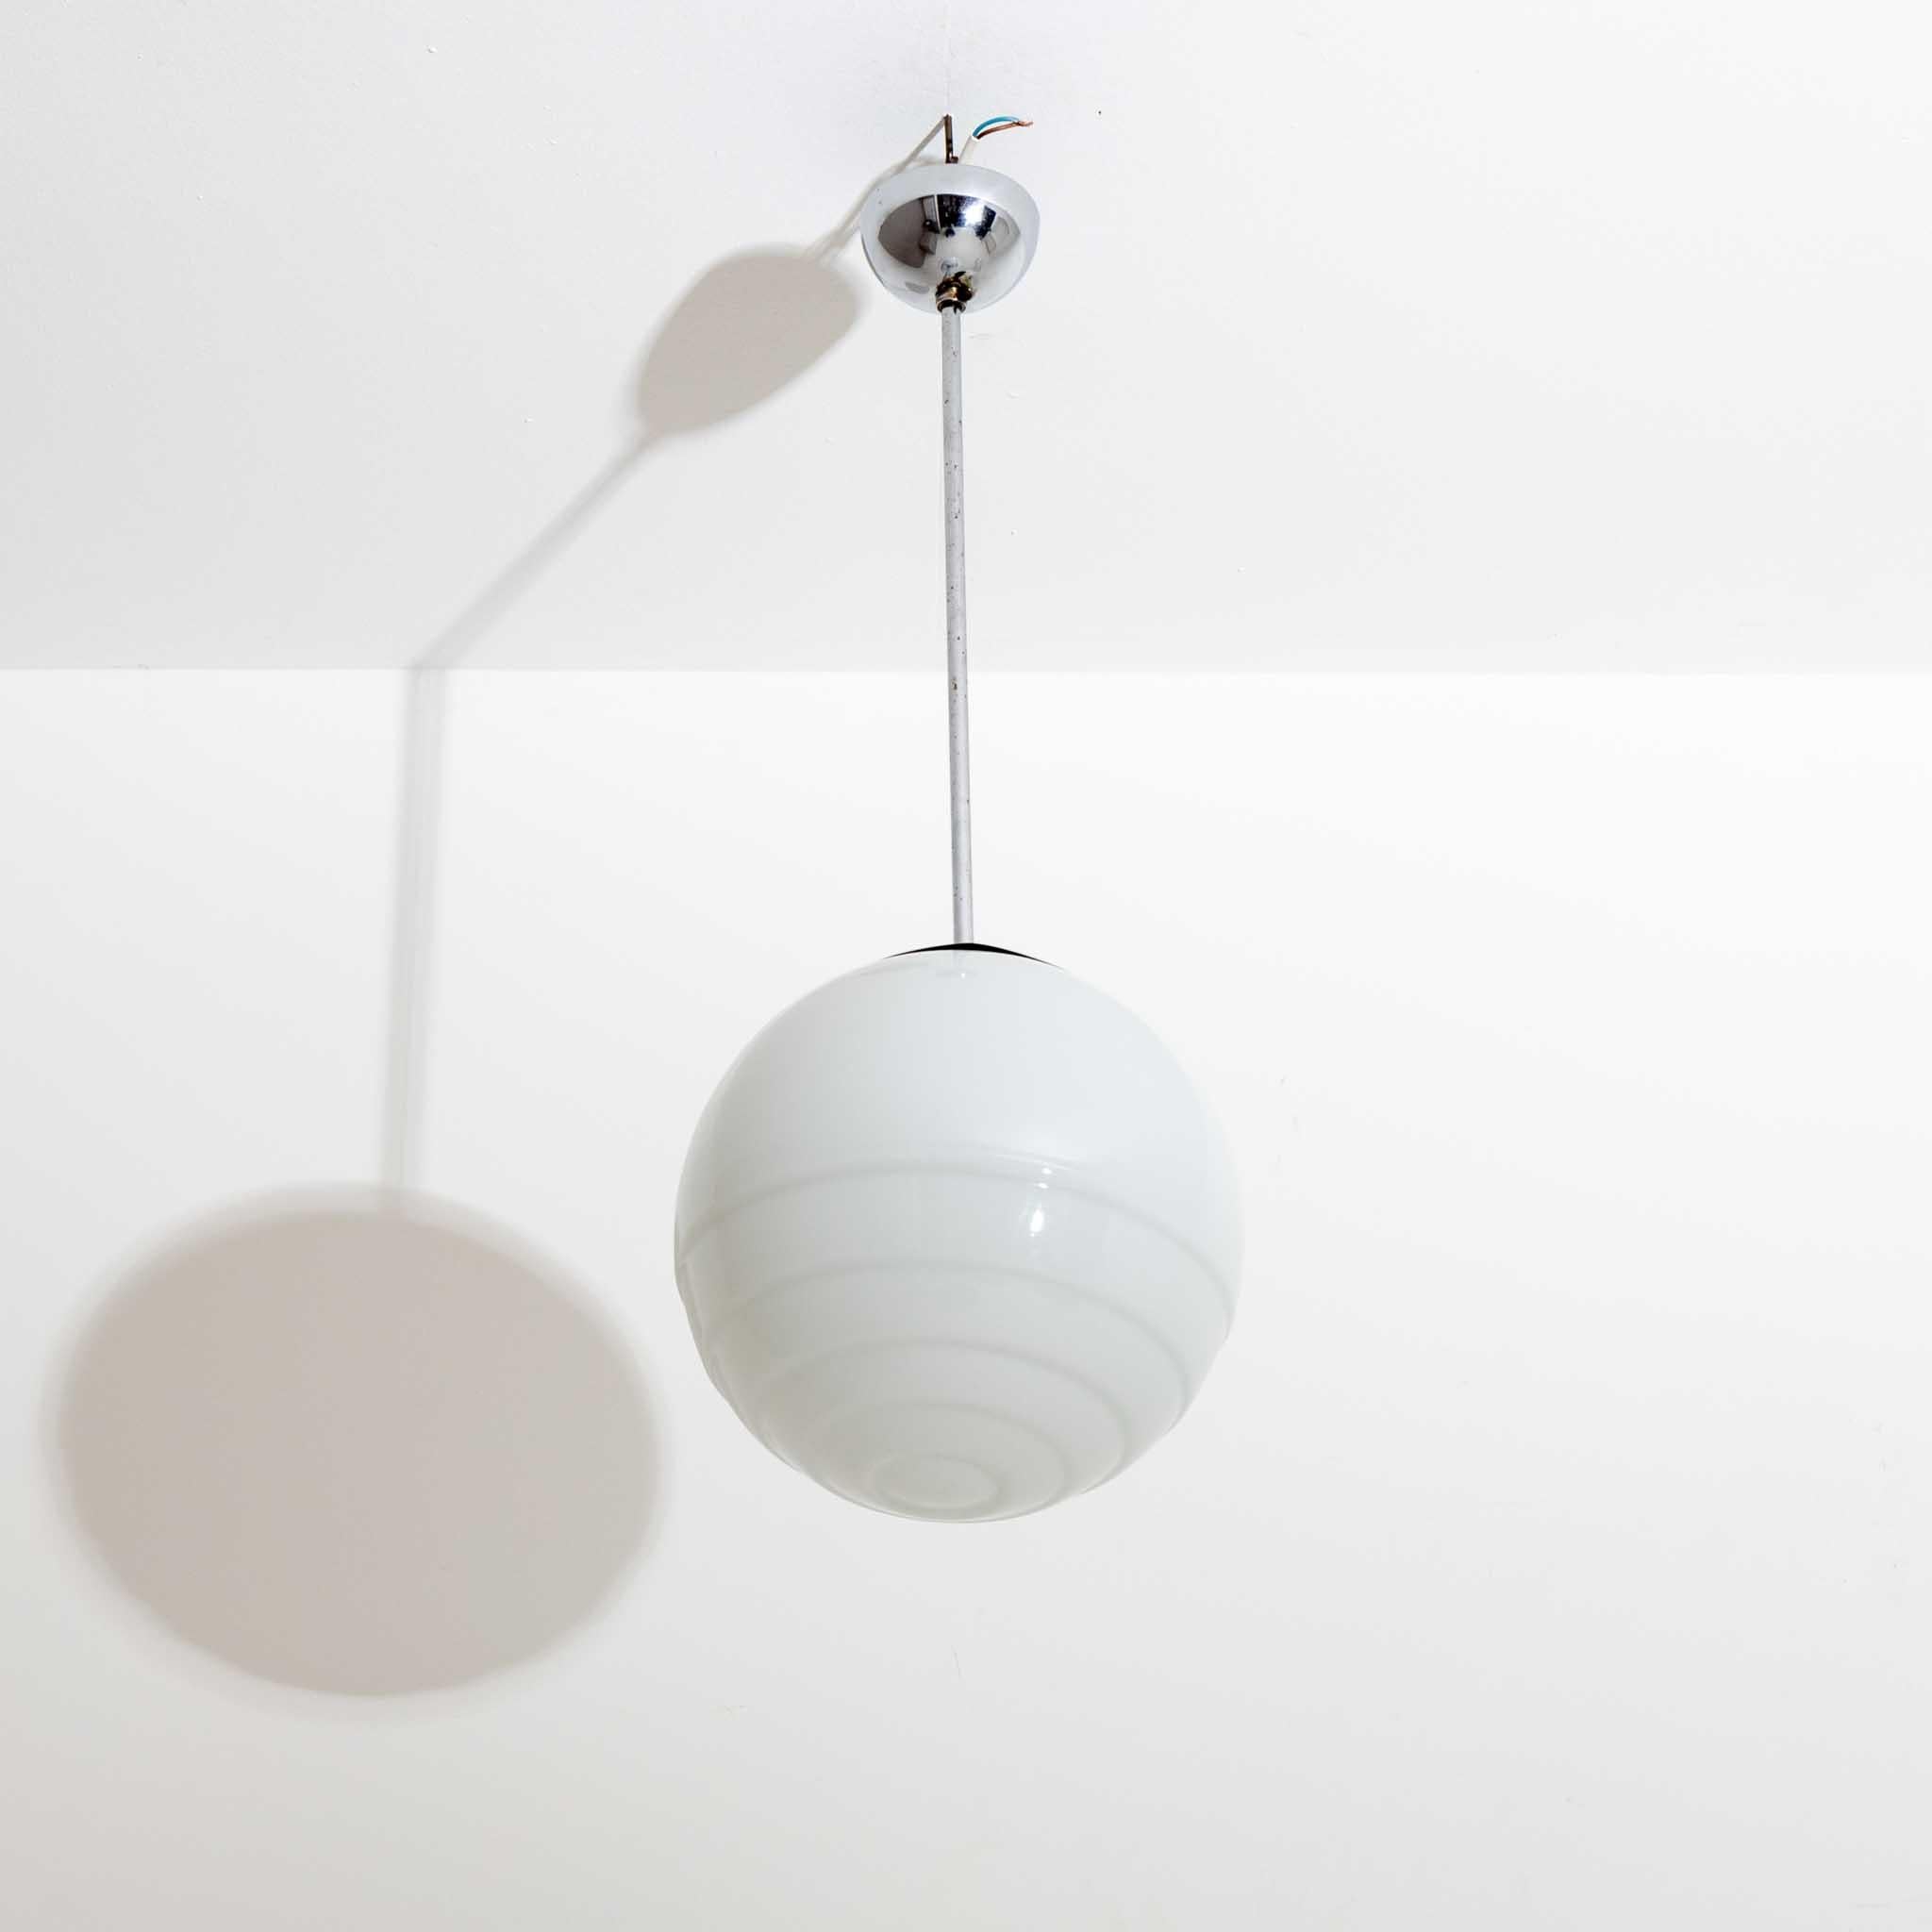 Pendant lamp made of chromed metal and frosted glass shade in the shape of a ball with three grooves.